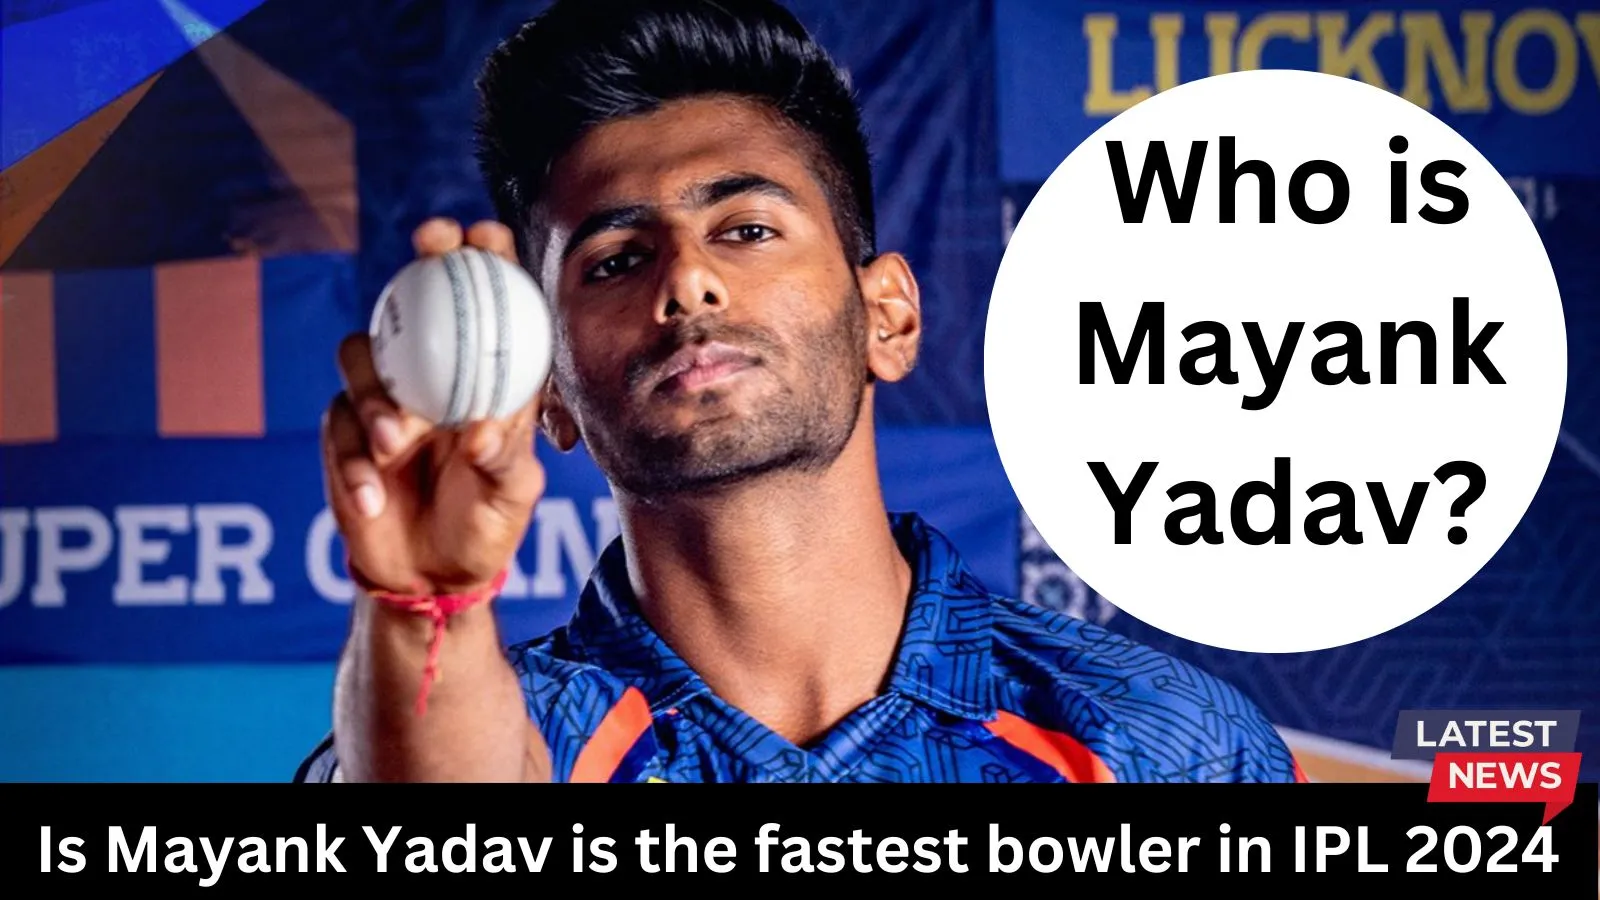 Who is Mayank Yadav? Is Mayank Yadav is the fastest bowler in IPL 2024